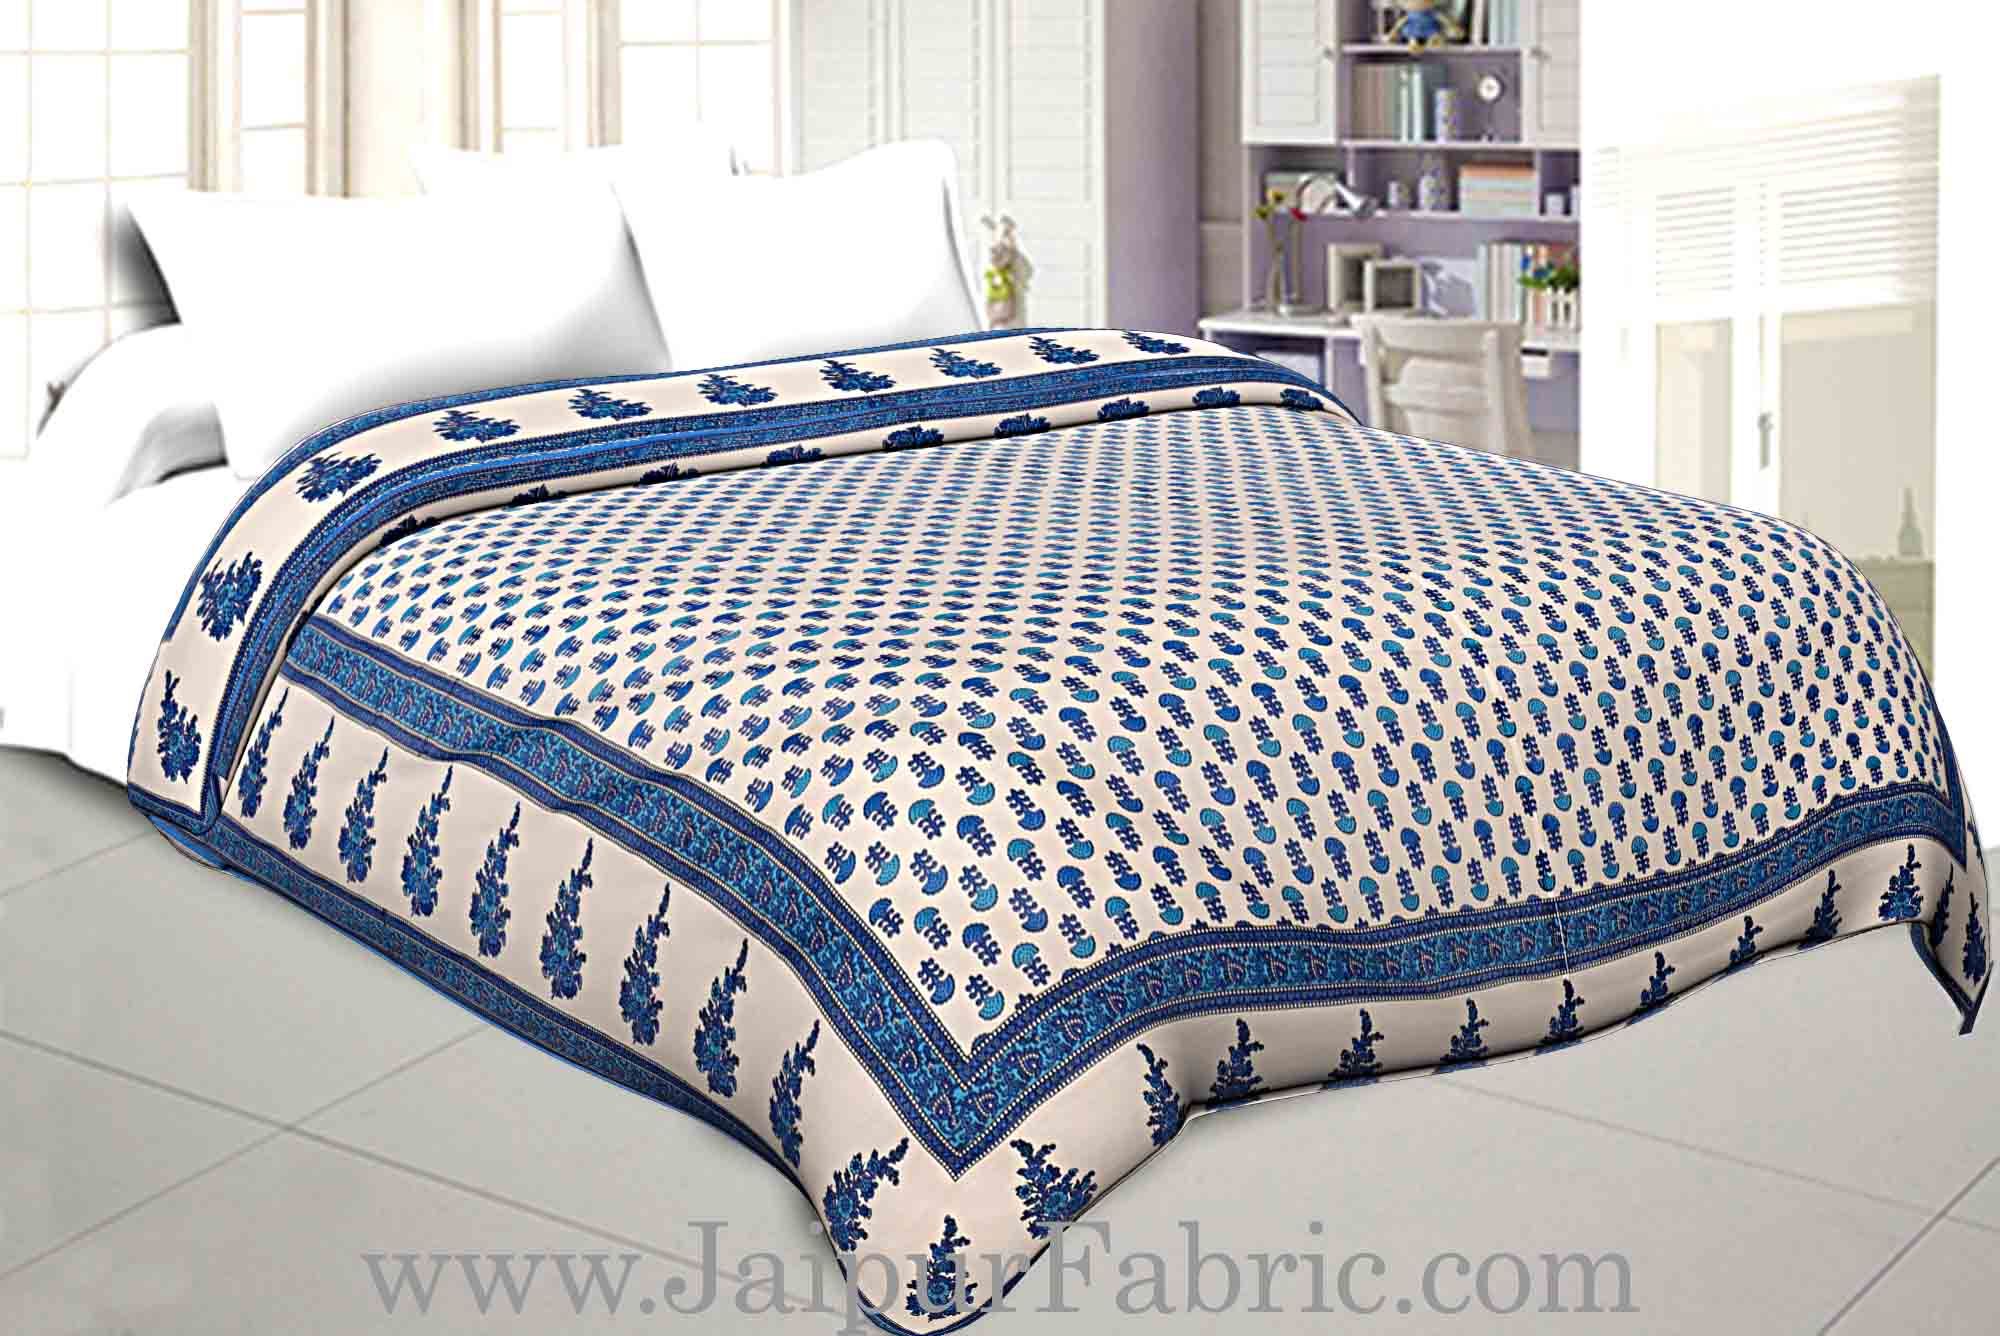 Double Bed Dohar Fine Smooth Cotton Floral Print  Use As Multi Purpose (Chaddar,Blanket ,Ac Quilt)